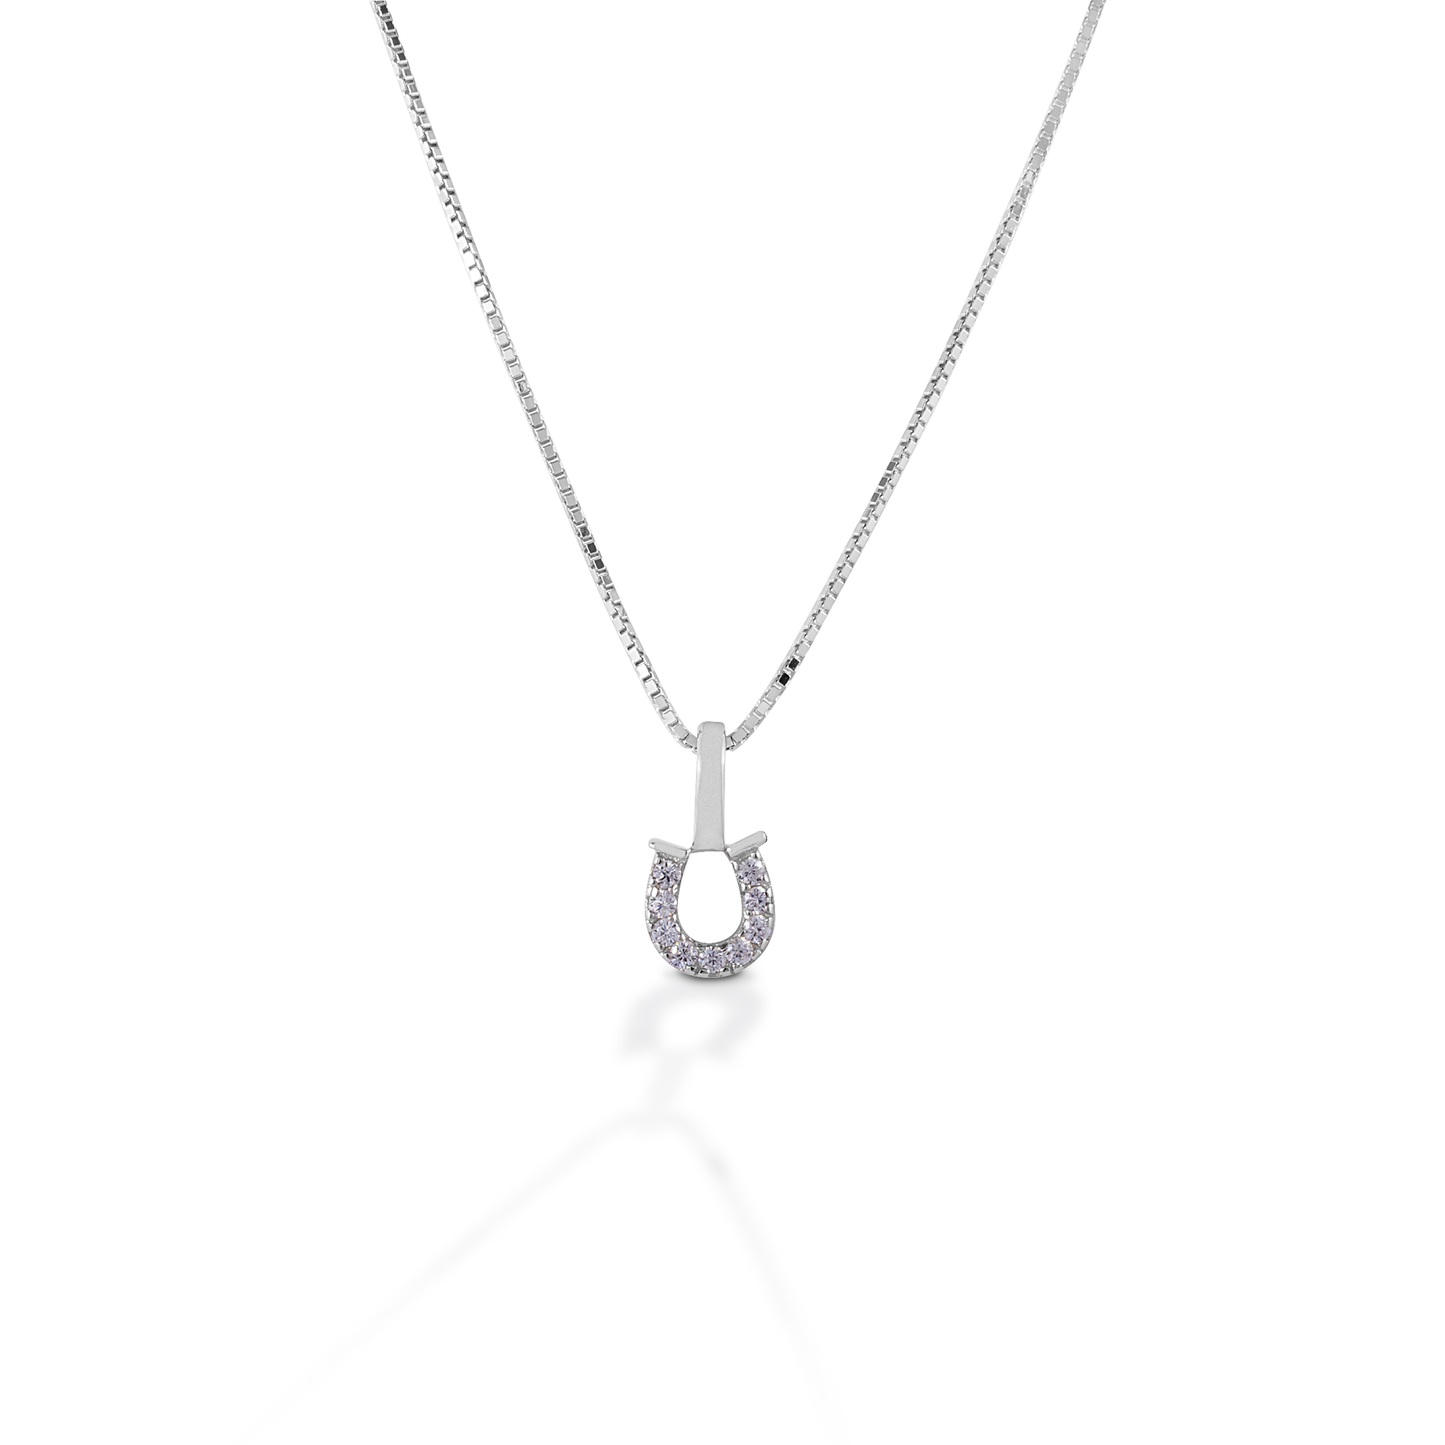 KELLY HERD CLEAR HORSESHOE NECKLACE - STERLING SILVER #11D